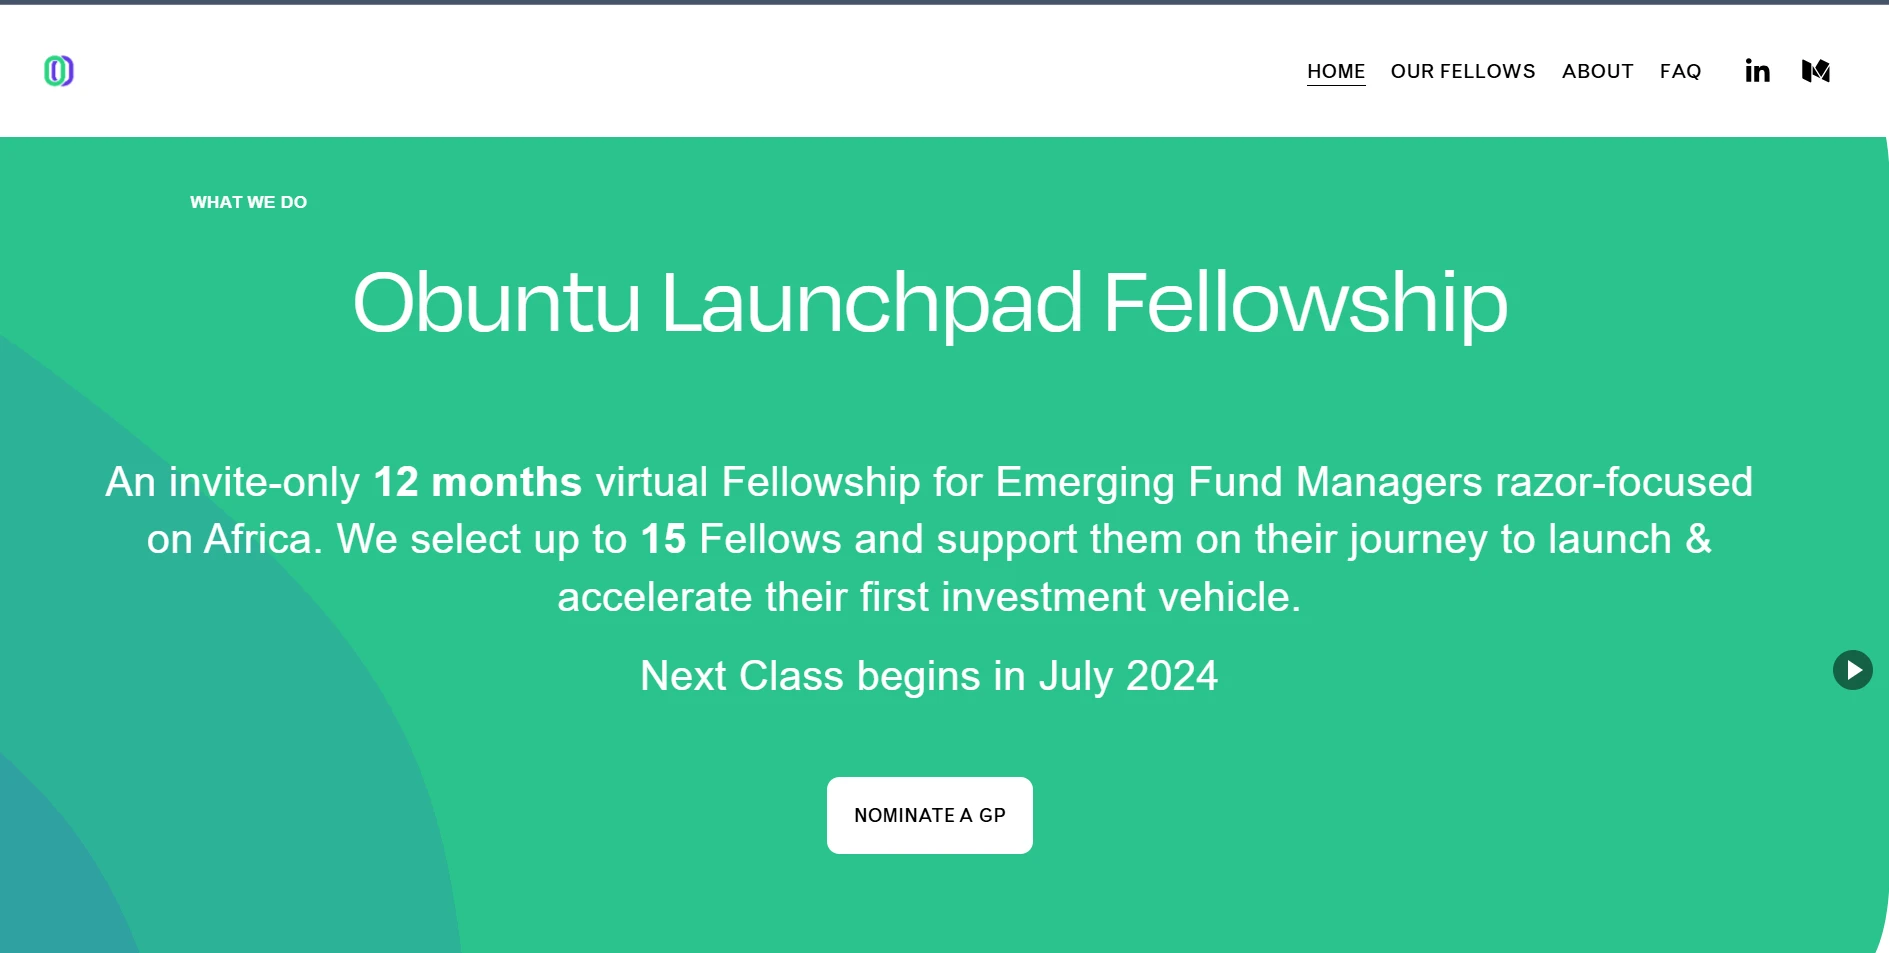 Obuntu Launchpad Fellowship for African Fund Managers